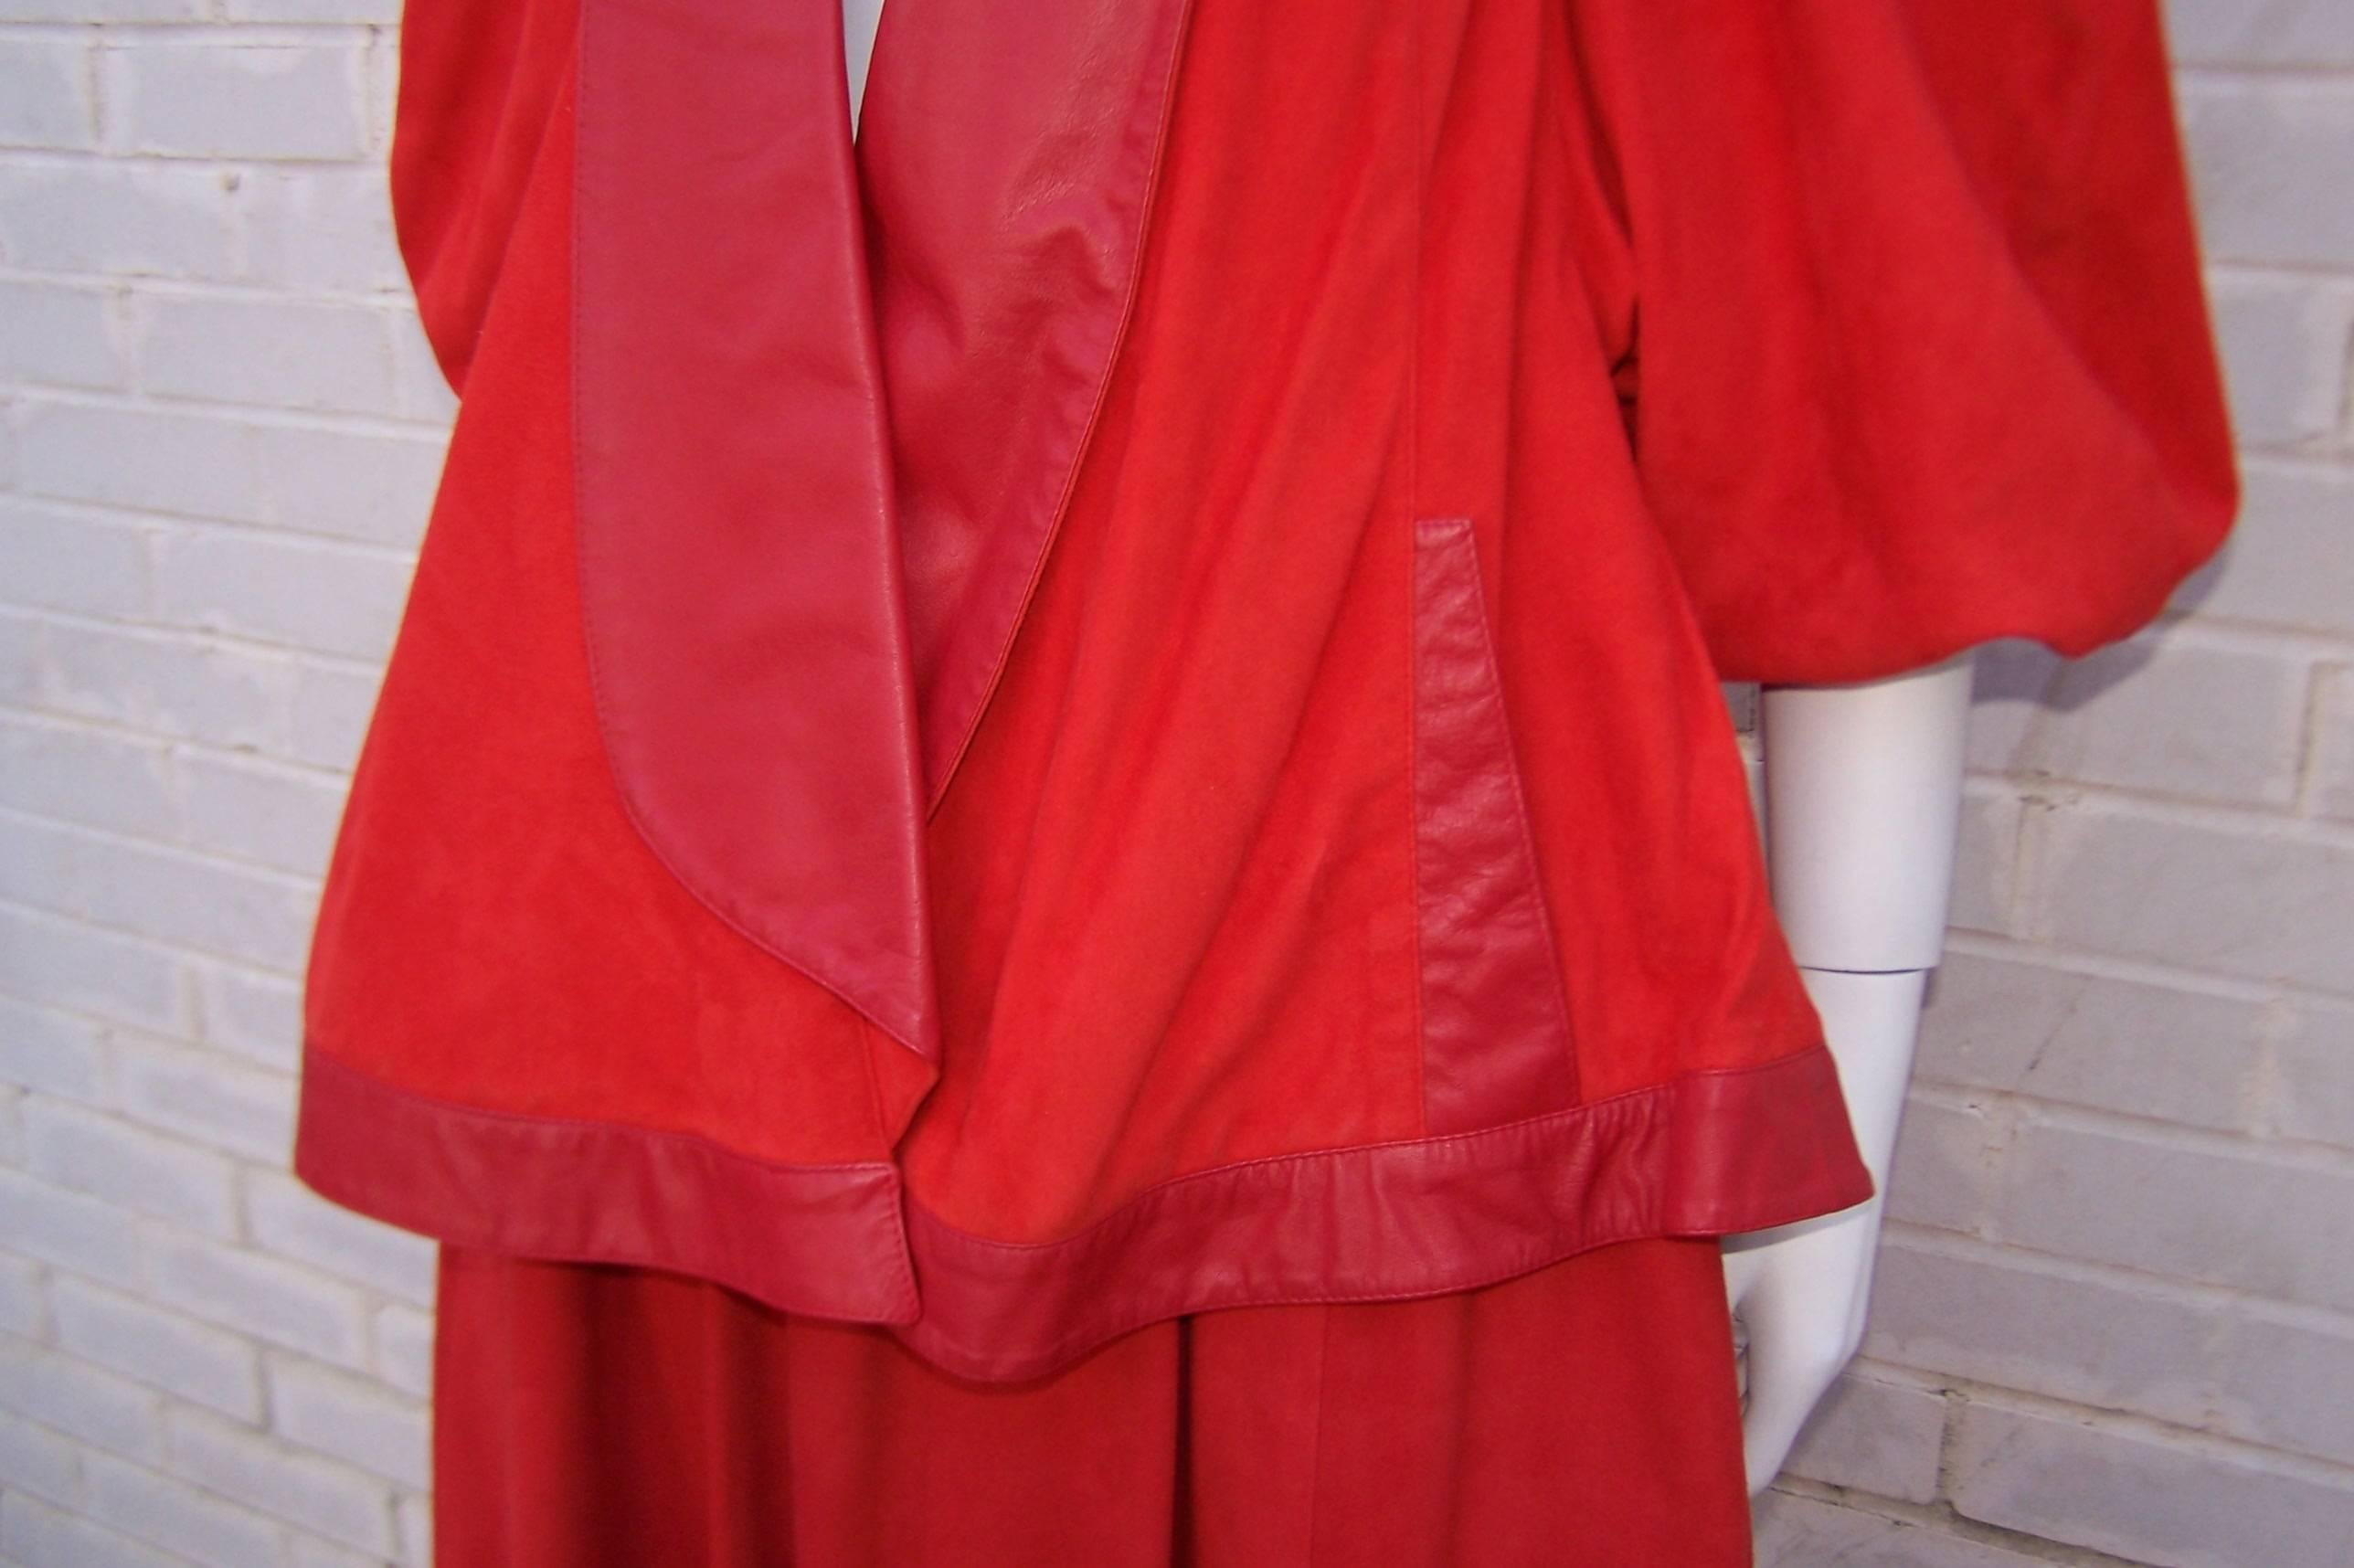 Women's New Wave 1980's Lipstick Red Suede Leather Skirt Suit With Swing Jacket